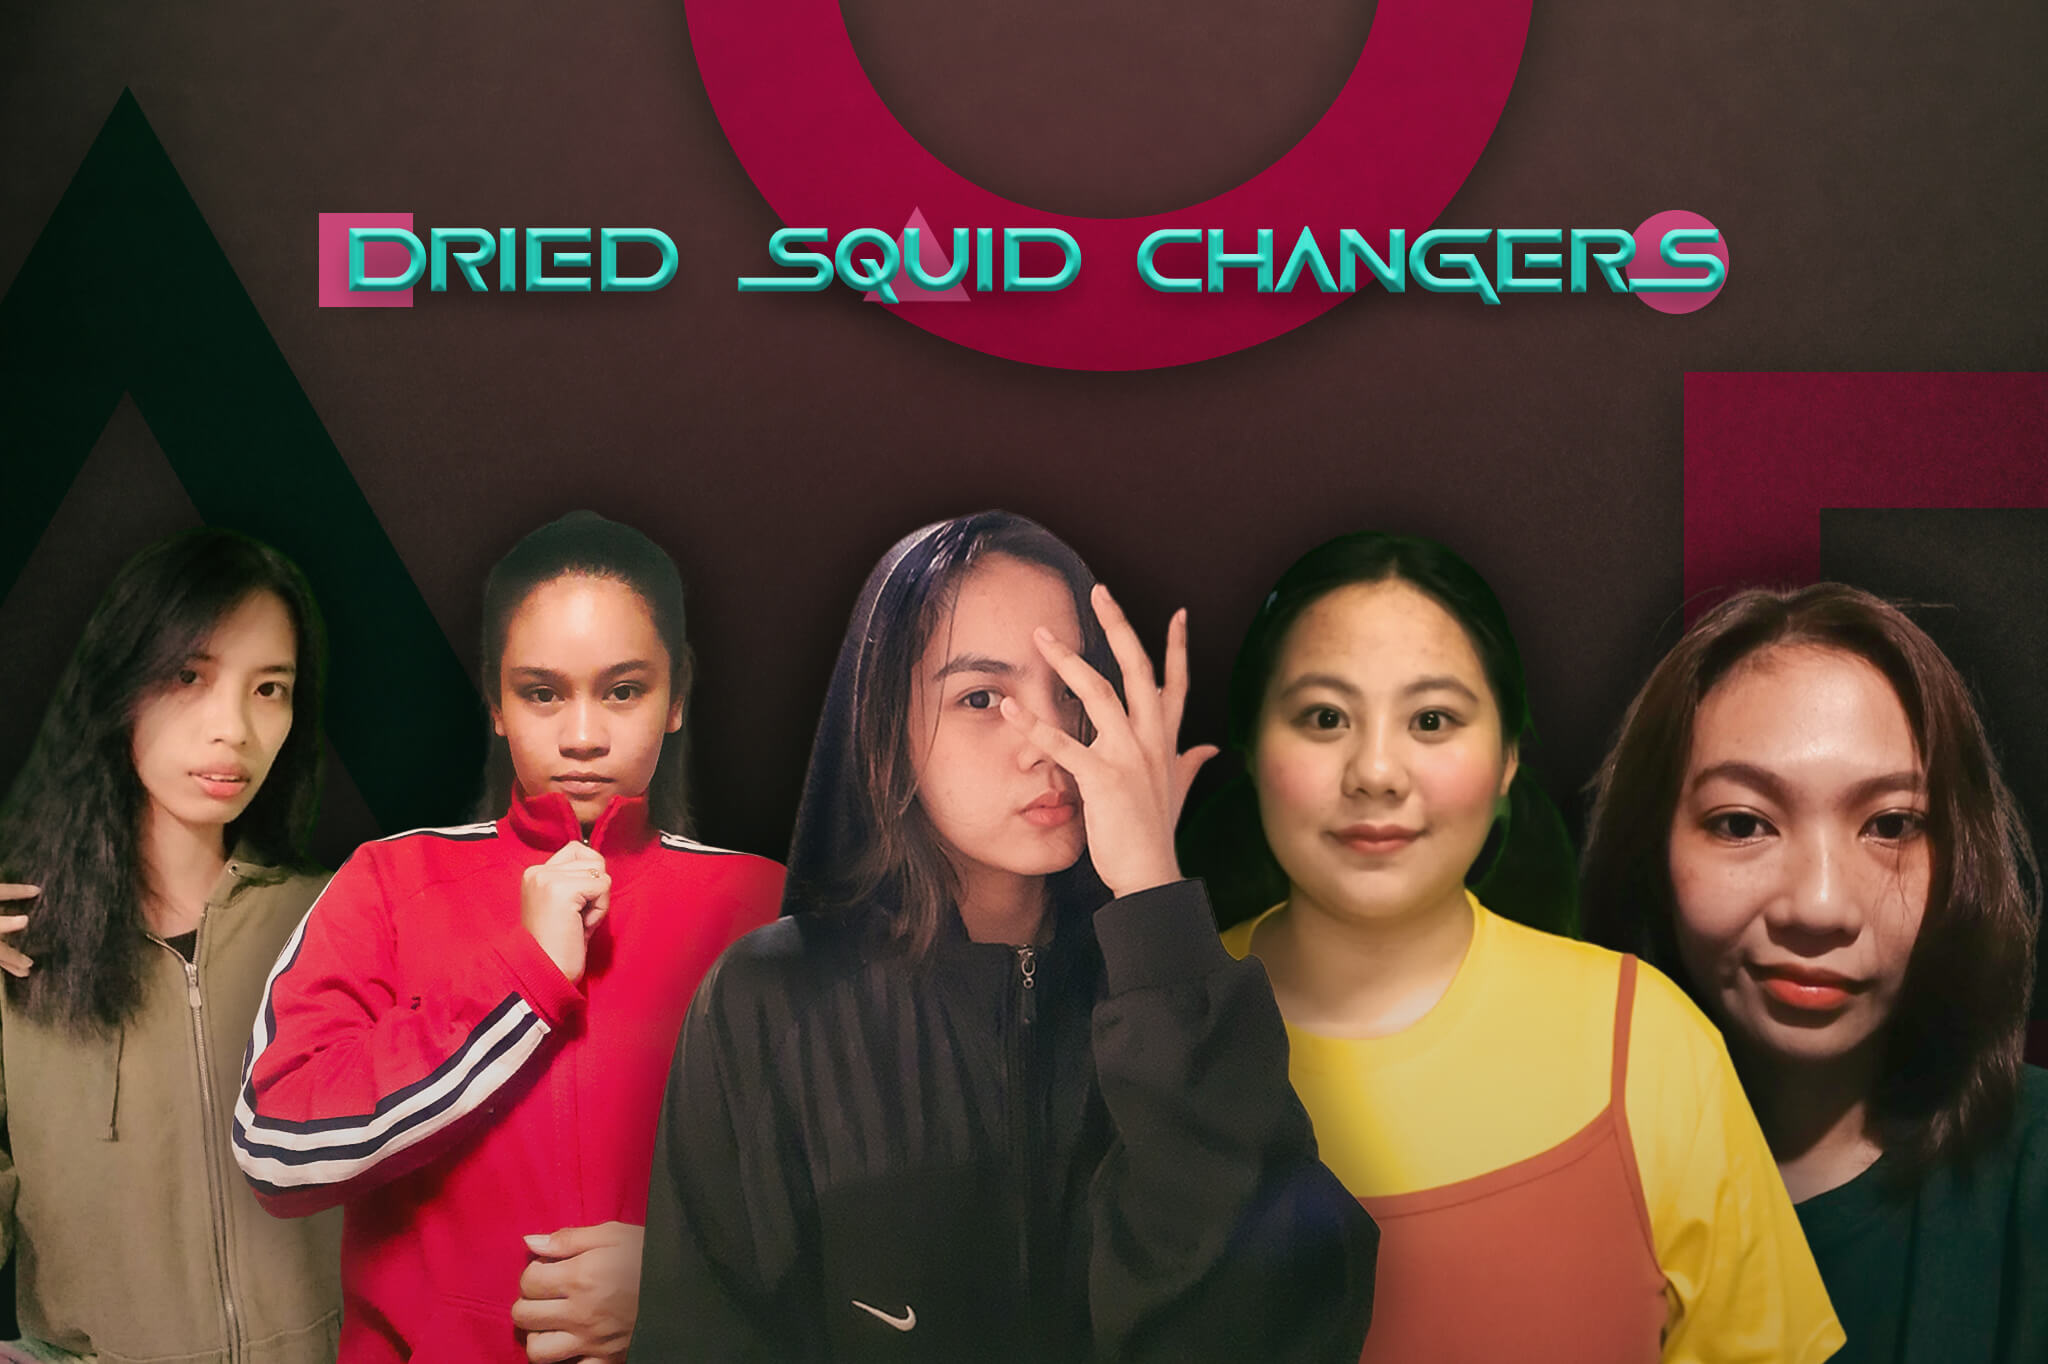 AIA Life Hackers 2021 Dried Squid Changers from Polytechnic University of the Philippines